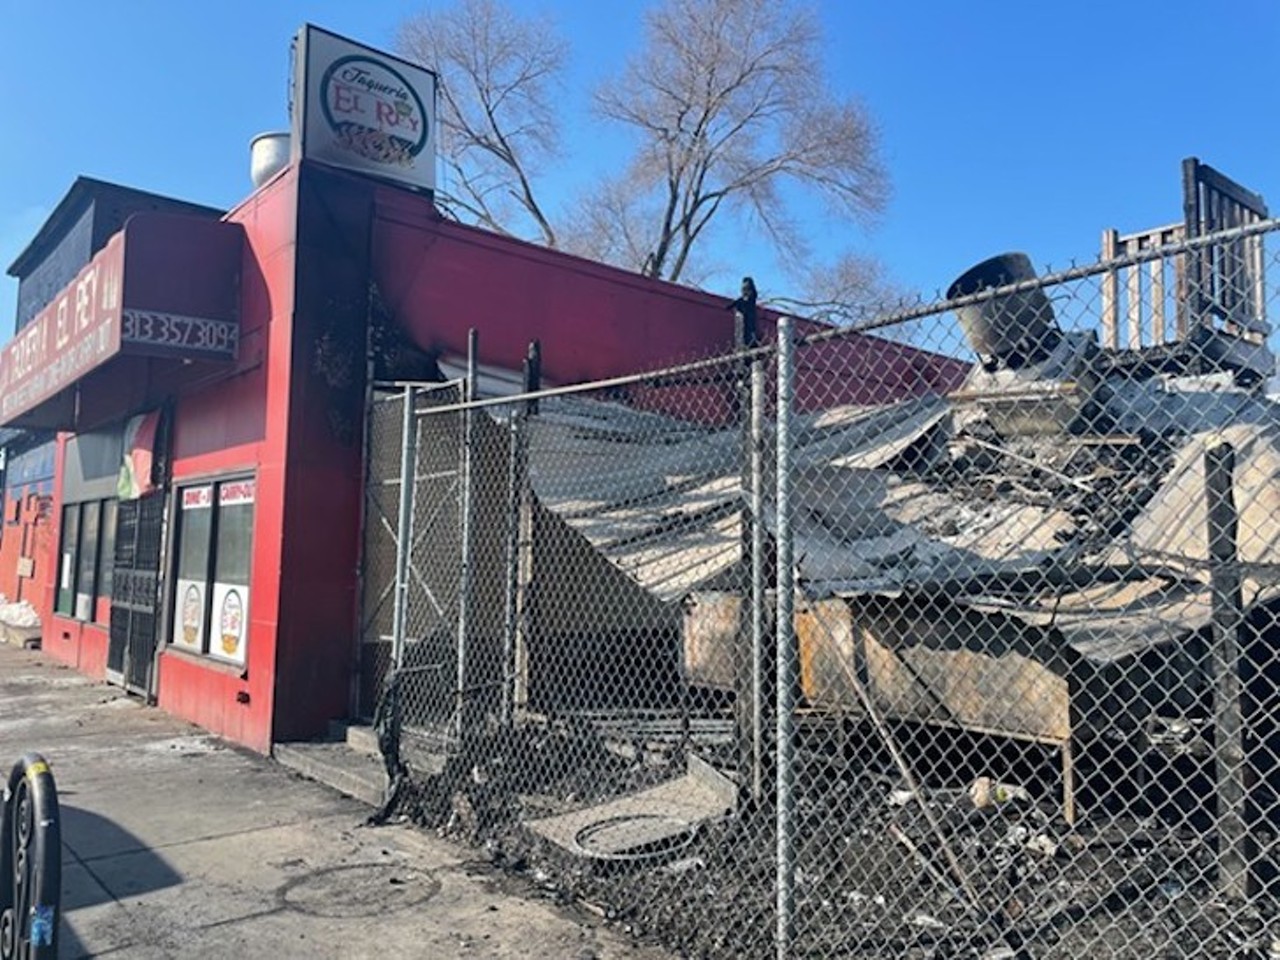 Taqueria El Rey
4730 W. Vernor Hwy, Detroit
A fire destroyed one of Detroit's favorite taco spots, Taqueria El Rey. The restaurant launched a crowdsourcing campaign in January to help support employees through the devastsation.